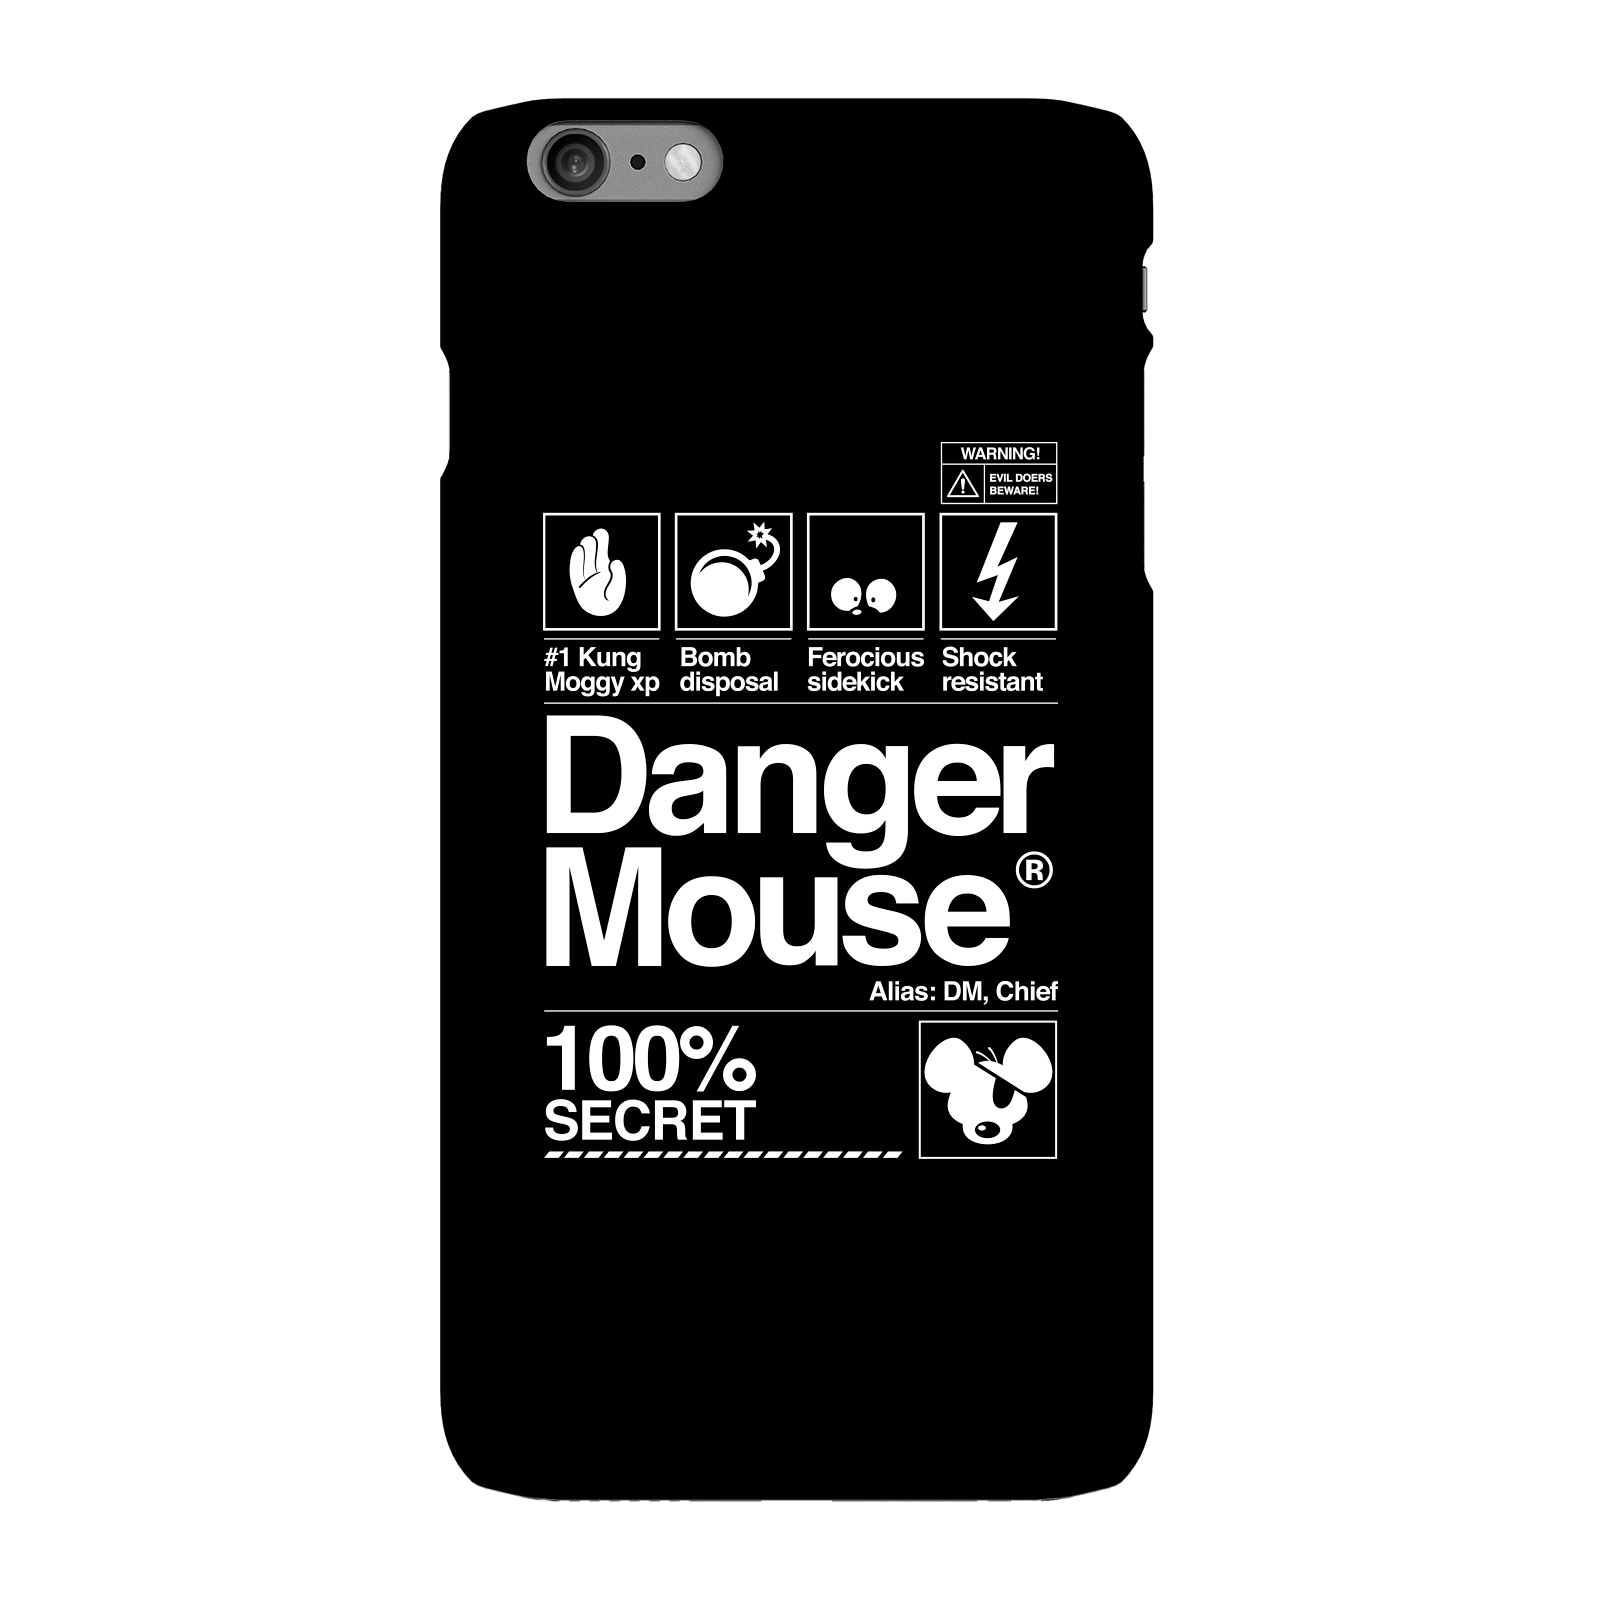 Danger Mouse 100% Secret Phone Case for iPhone and Android - iPhone 6 Plus - Snap Case - Matte